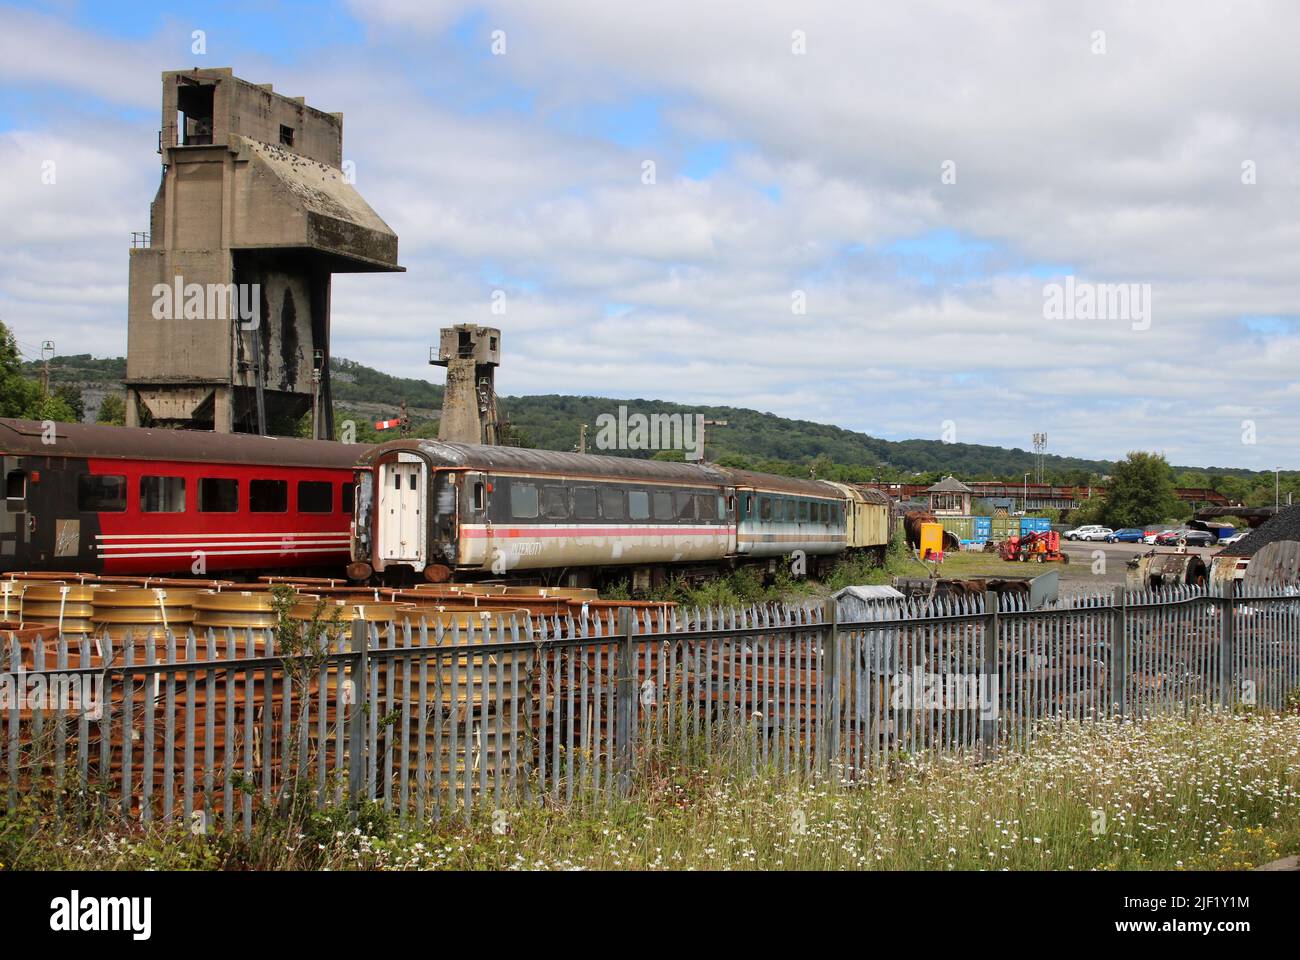 View into part of West Coast railways base at Carnforth showing old coaches and the coaling plant historic listed building, June 2022. Stock Photo